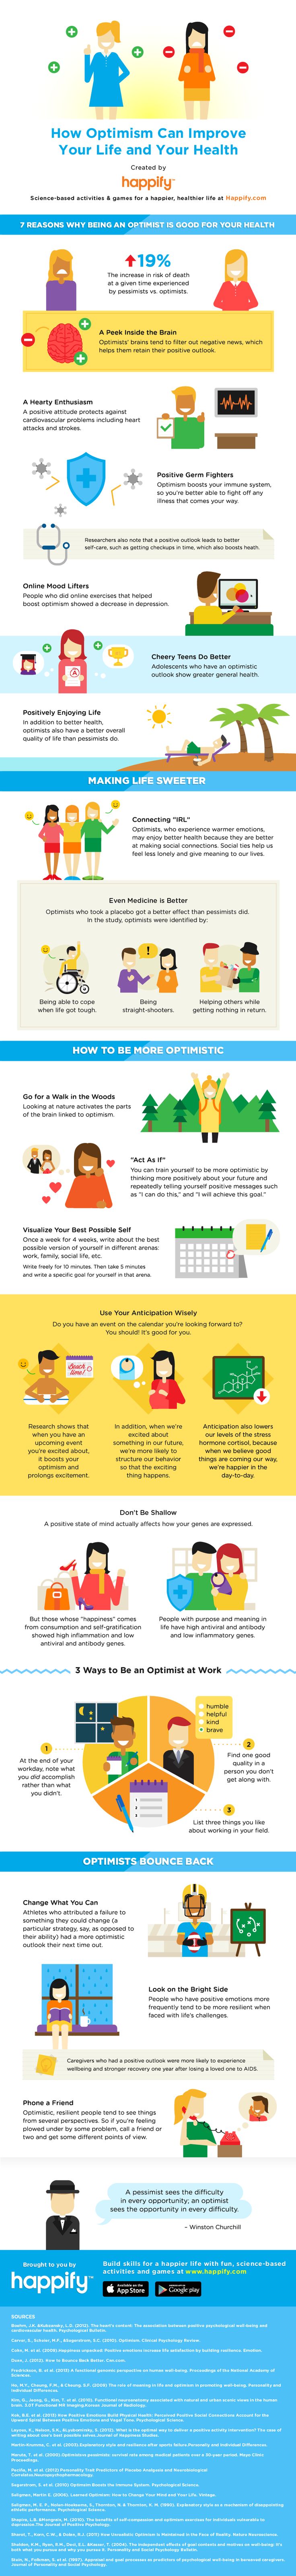 Psychology-Infographic-7-Scientific-Reasons-Why-Being-An-Optimist-Is-Good-For-Your-Health-The-Power-o Psychology Infographic : 7 Scientific Reasons Why Being An Optimist Is Good For Your Health - The Power o...